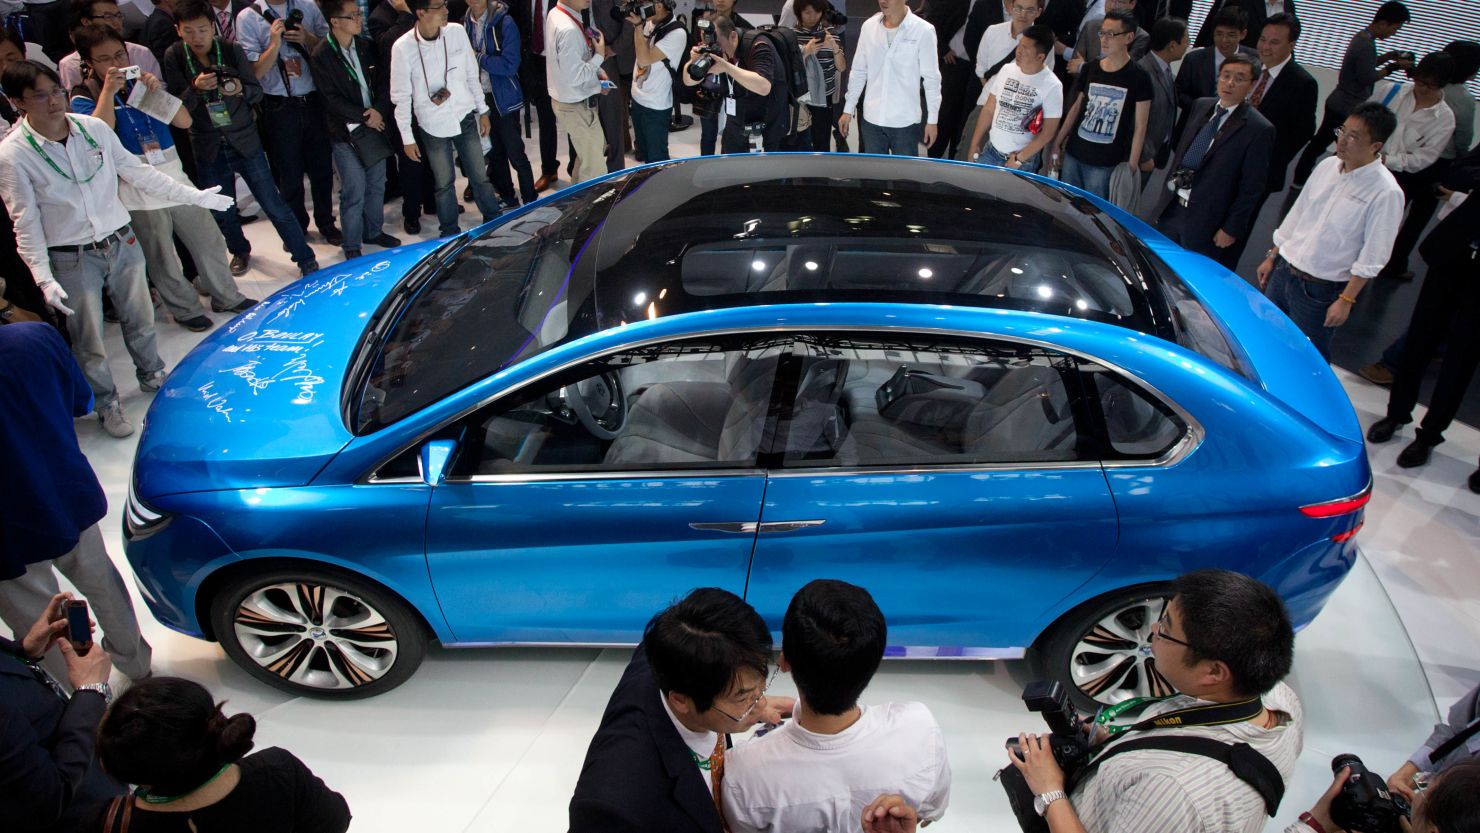 The Denza electric car concept was first unveiled at Auto China 2012.